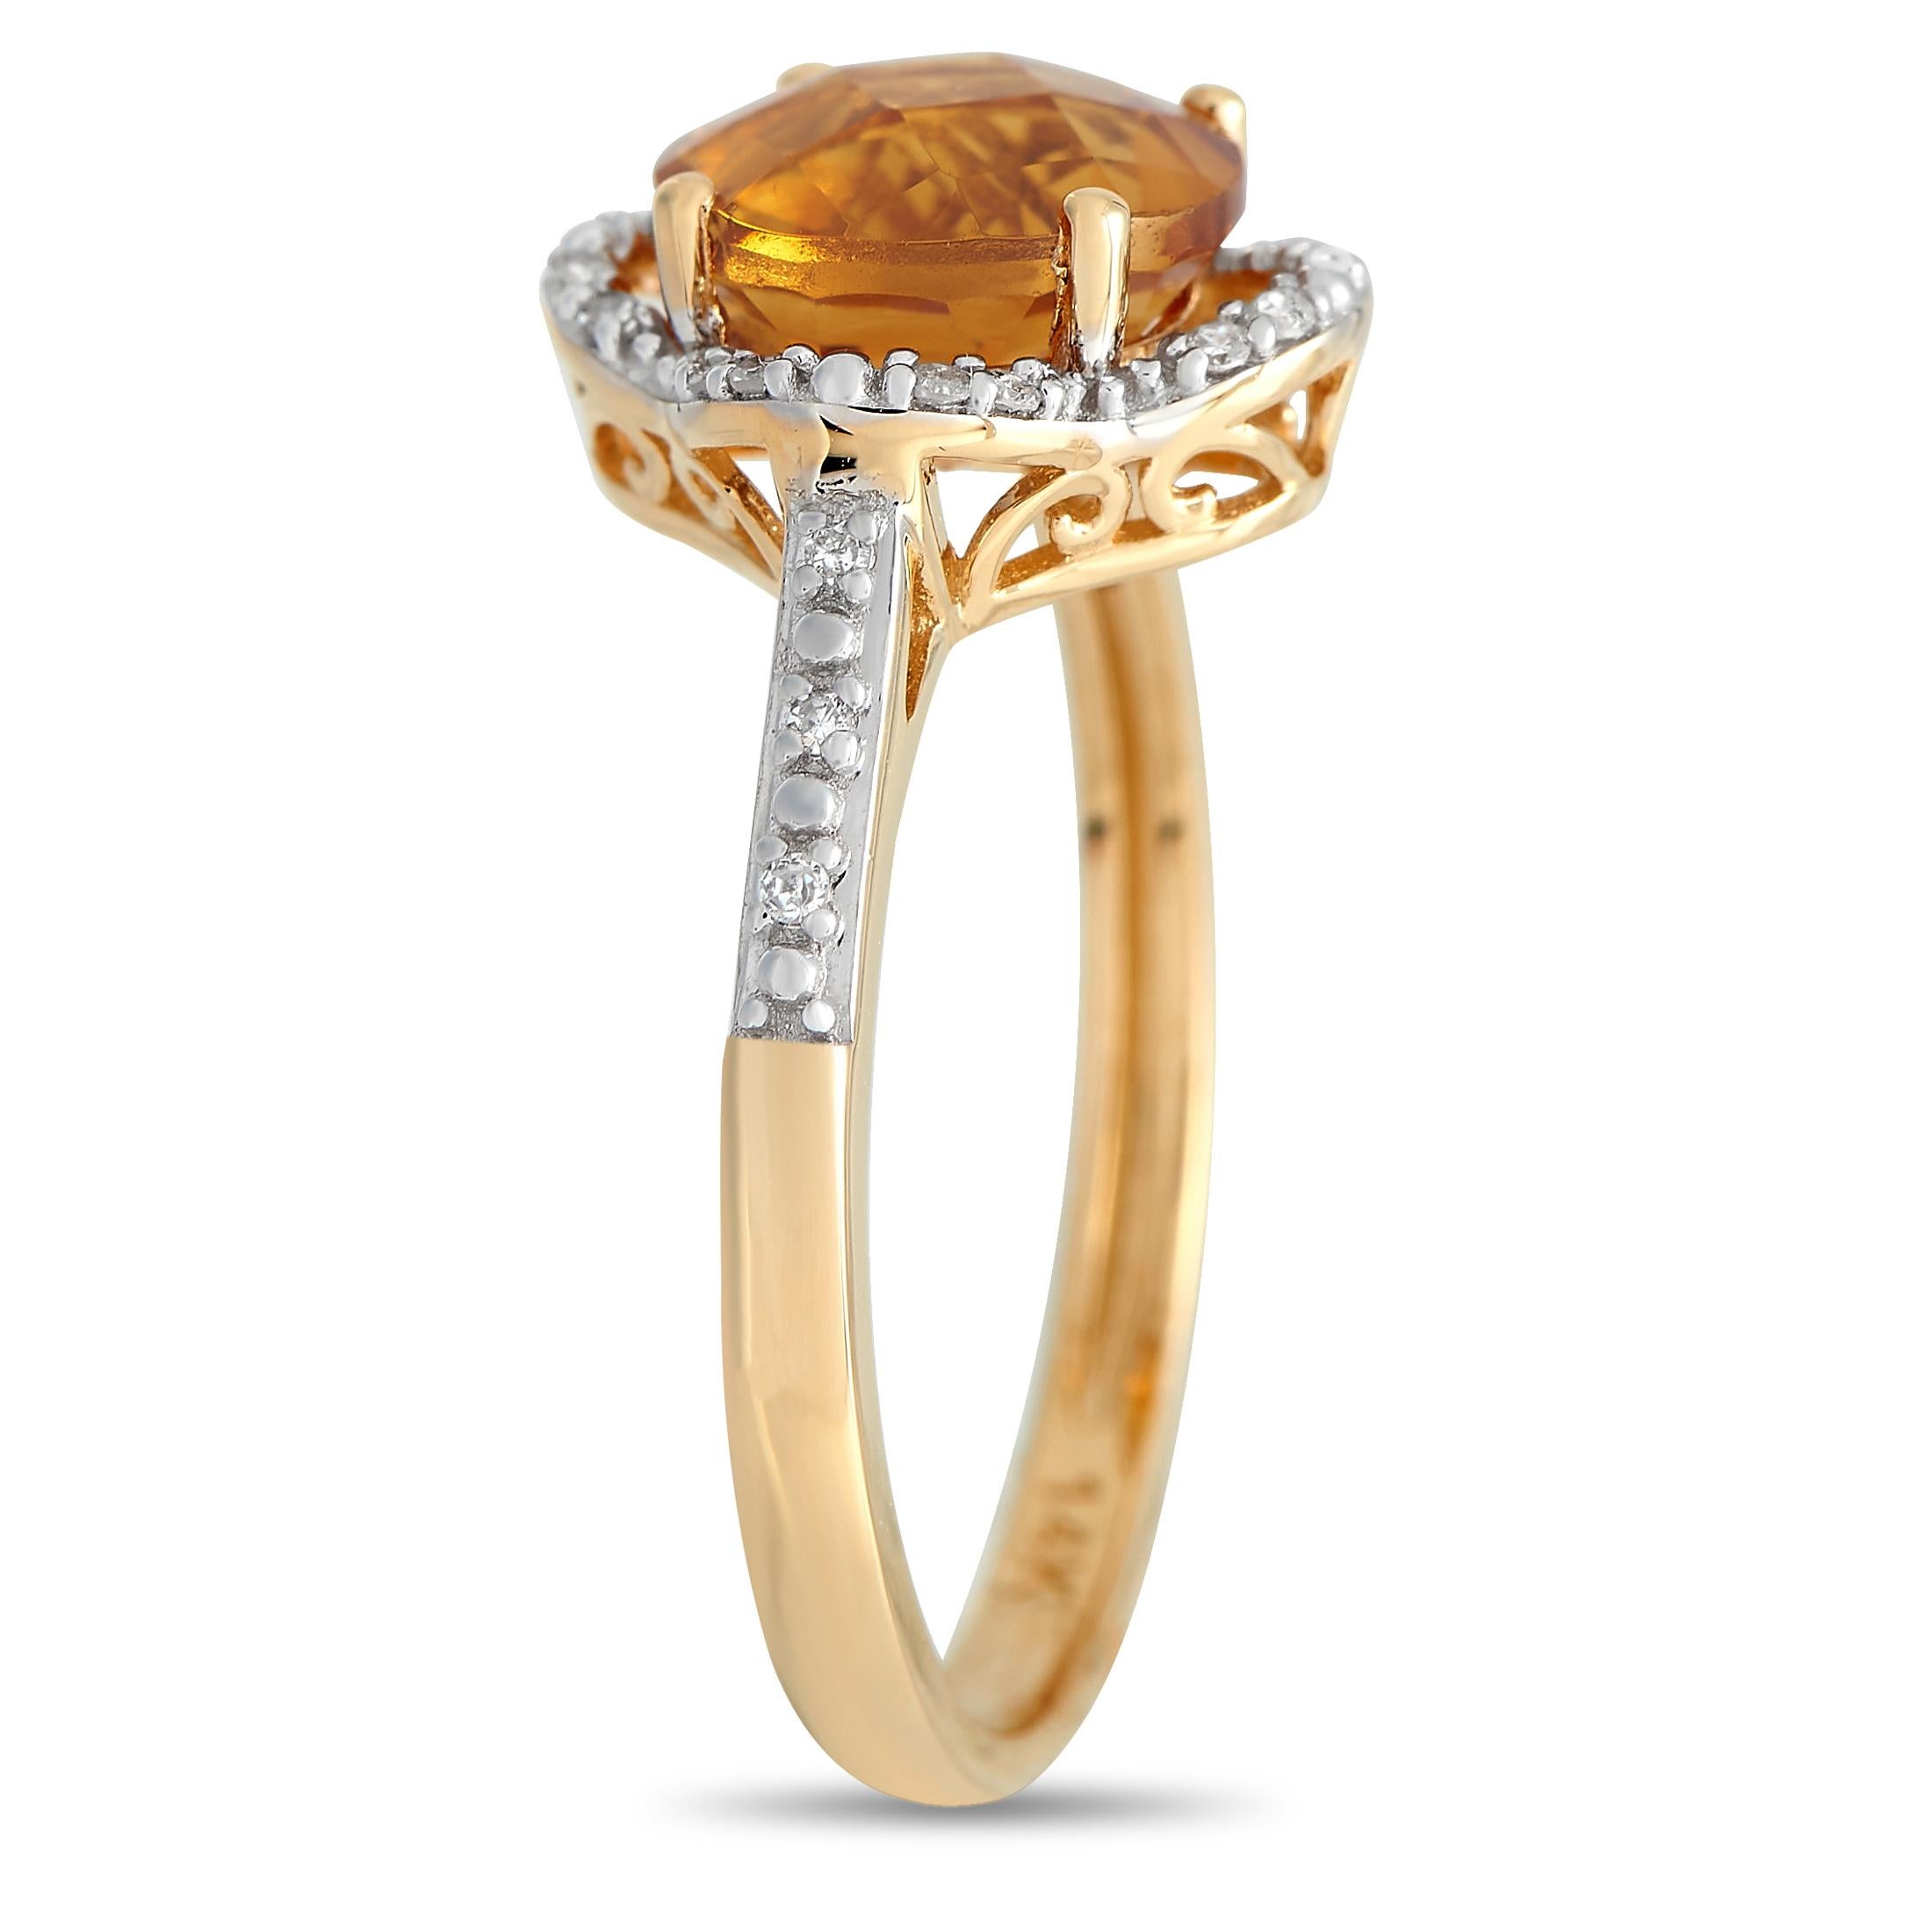 Here is an eye-catching piece of jewelry that will showcase your personality and fashion sense. This   ring is crafted in 14K yellow gold and bears a round citrine gemstone. The vivid yellow gem secured by four prongs sits at the centre of a